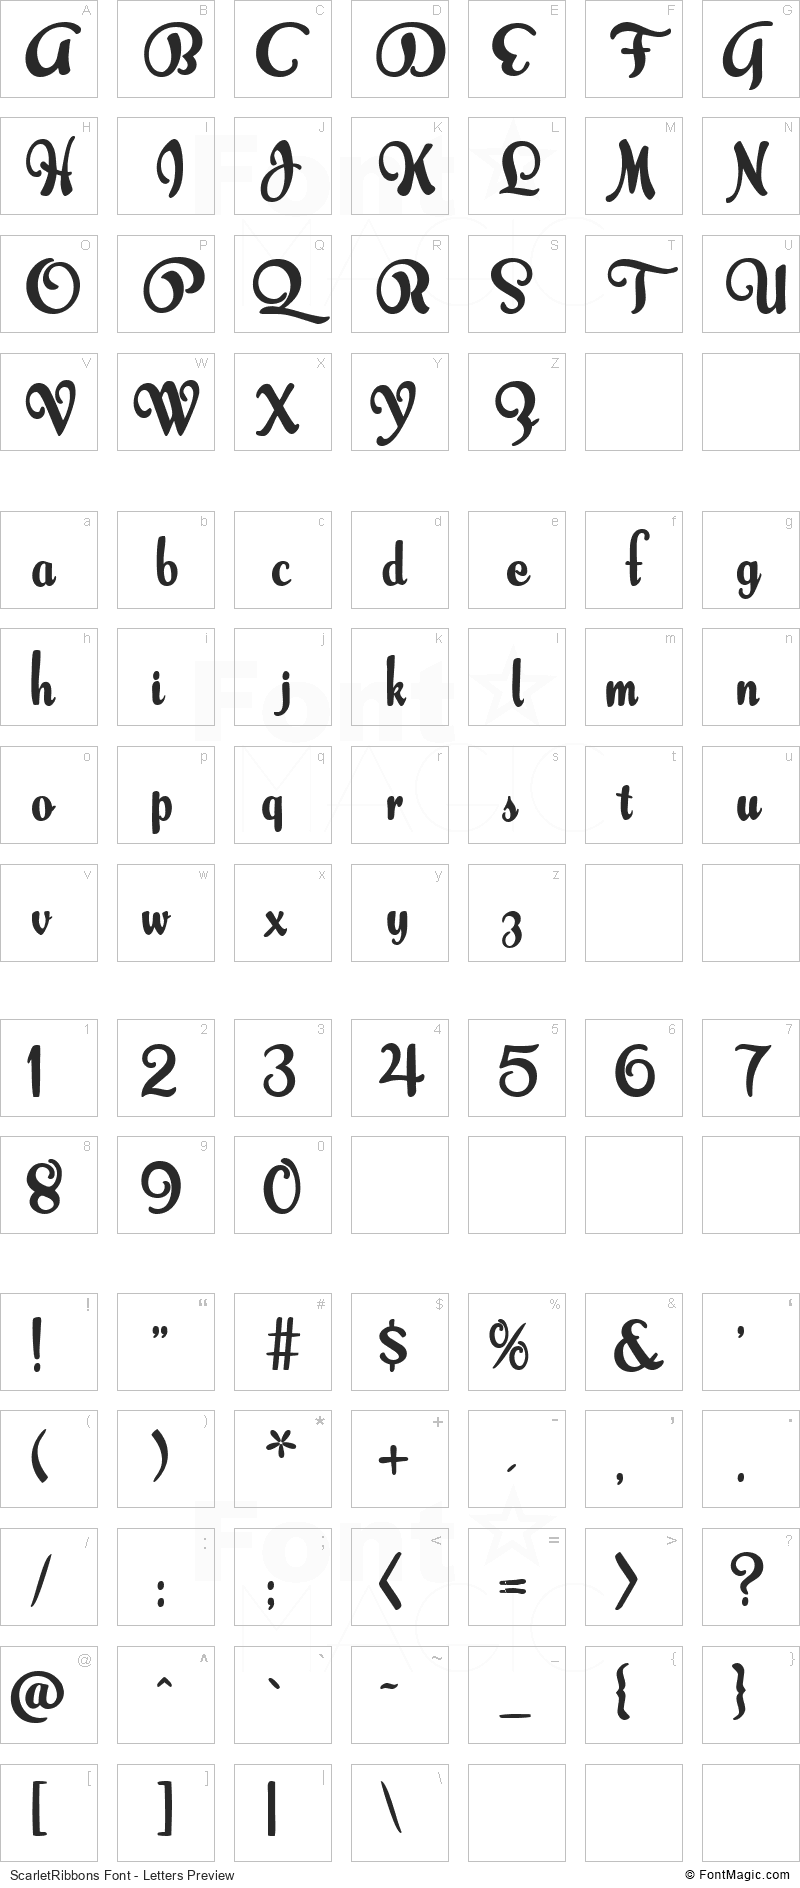 ScarletRibbons Font - All Latters Preview Chart